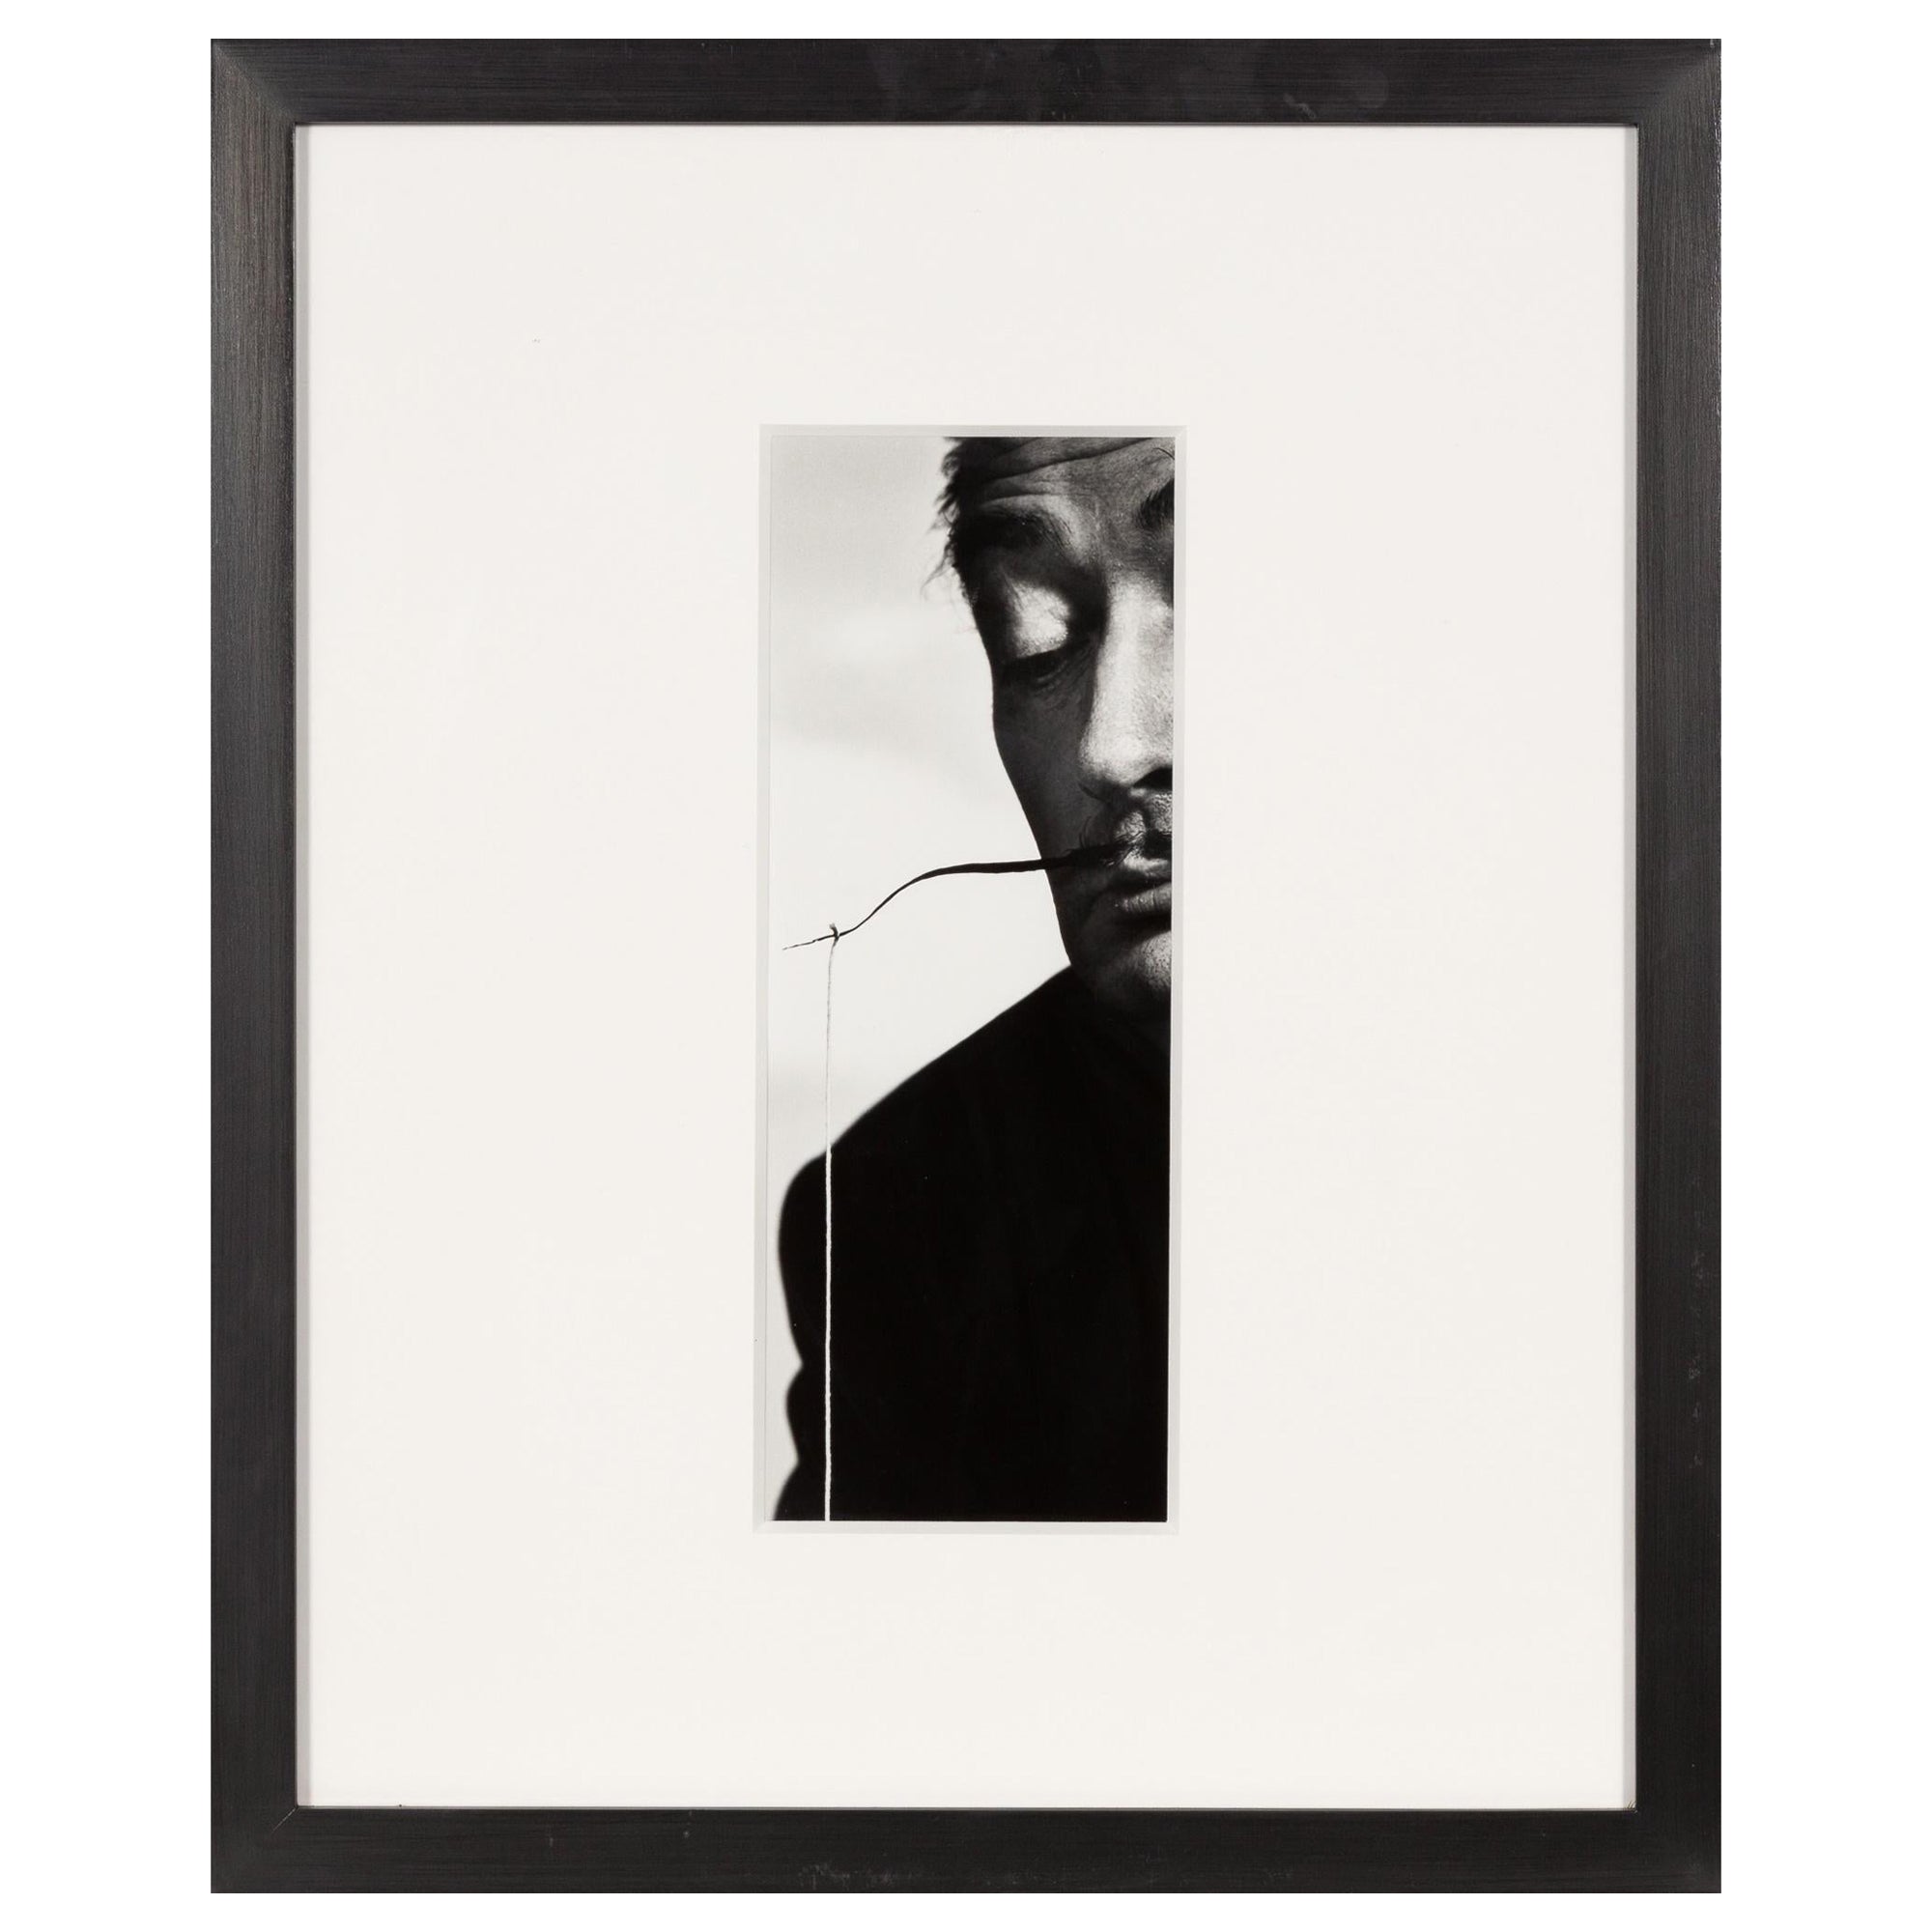 Framed Editioned Dali Photograph by Philippe Halsman For Sale